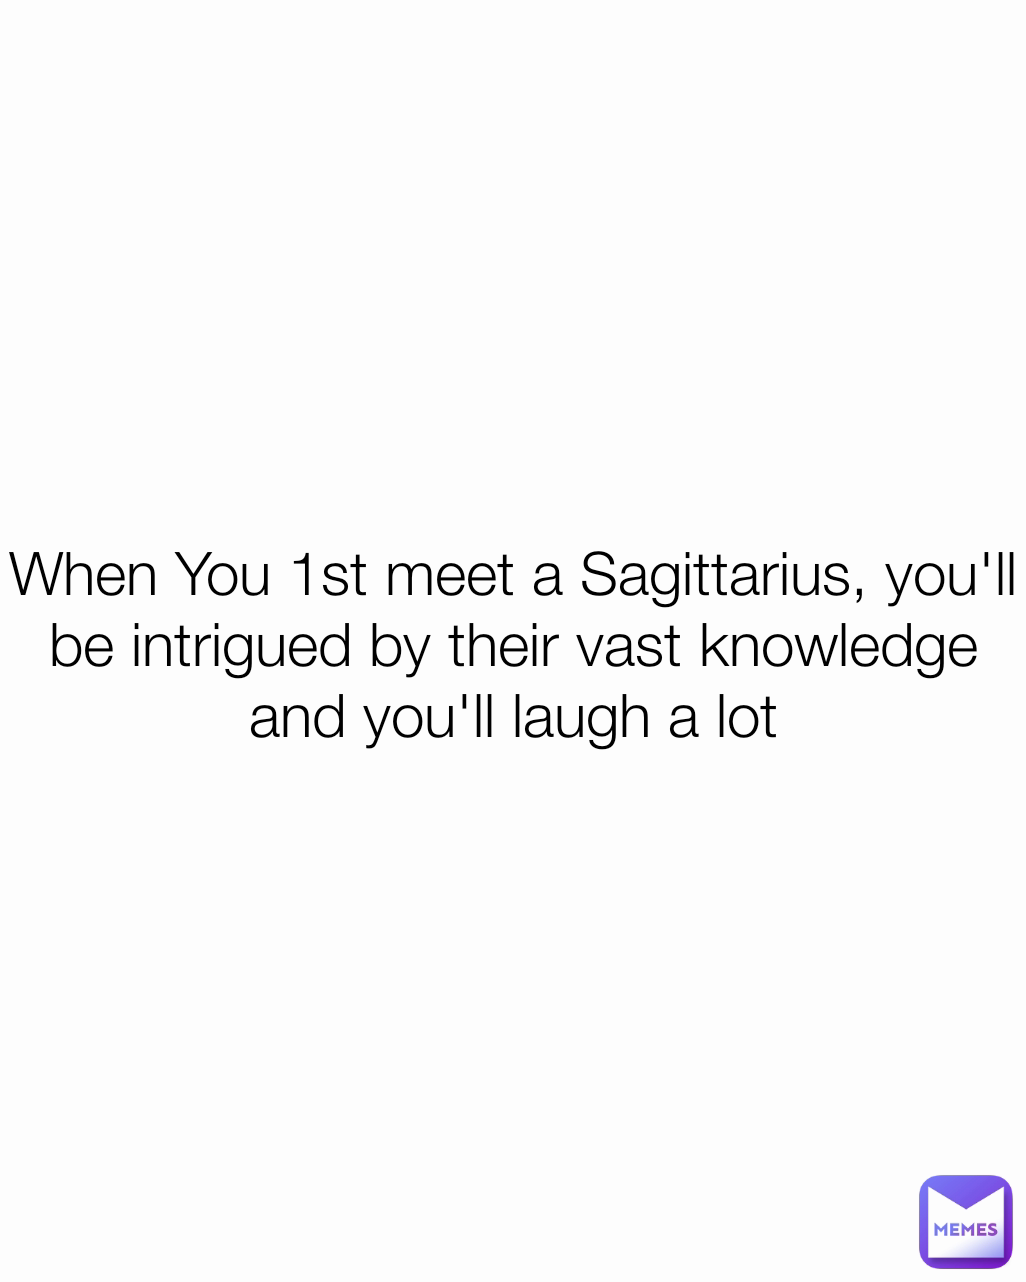 When You 1st meet a Sagittarius, you'll be intrigued by their vast knowledge and you'll laugh a lot